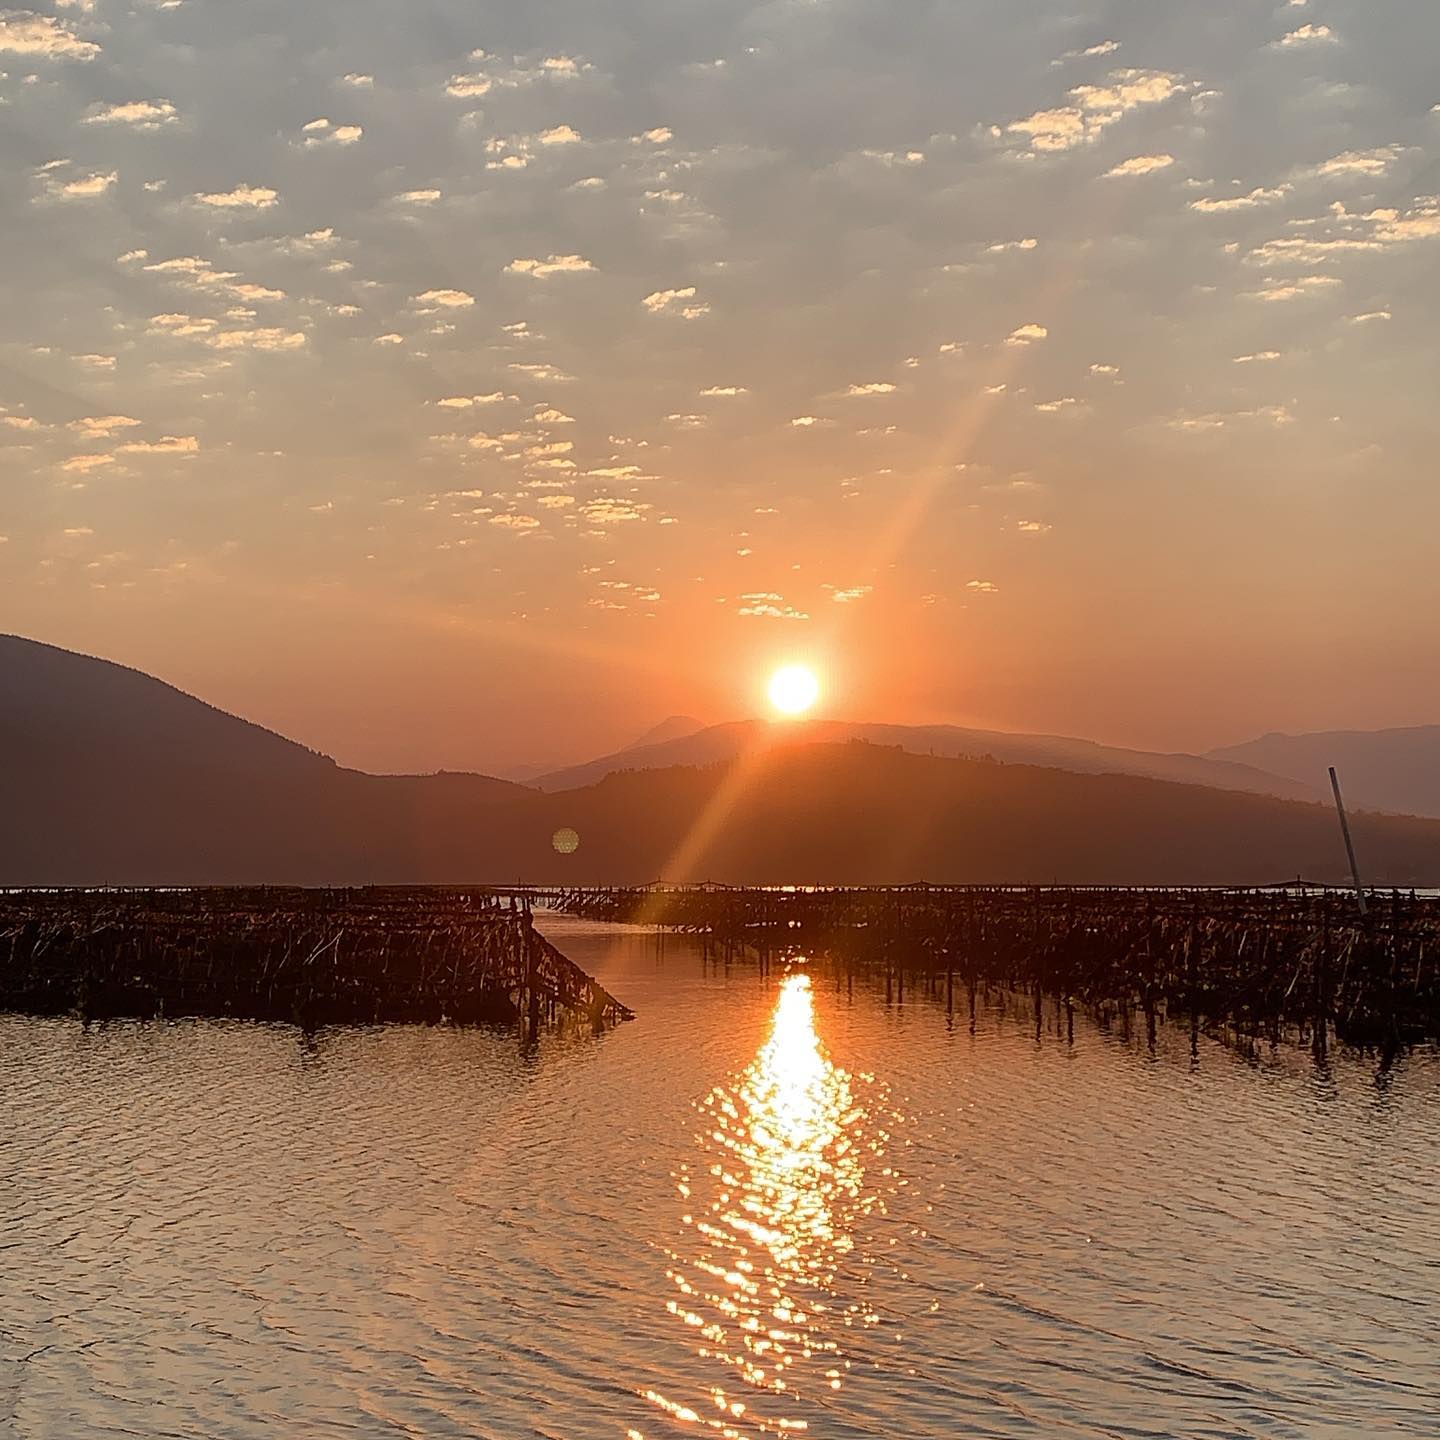 You just can't beat a Samish Bay sunrise! A lovely morning view standing from Salty "C" Seafood oyster beds looking toward fellow shellfish neighbors at Penn Cove Shellfish. Photo courtesy of Salty "C" Seafood.